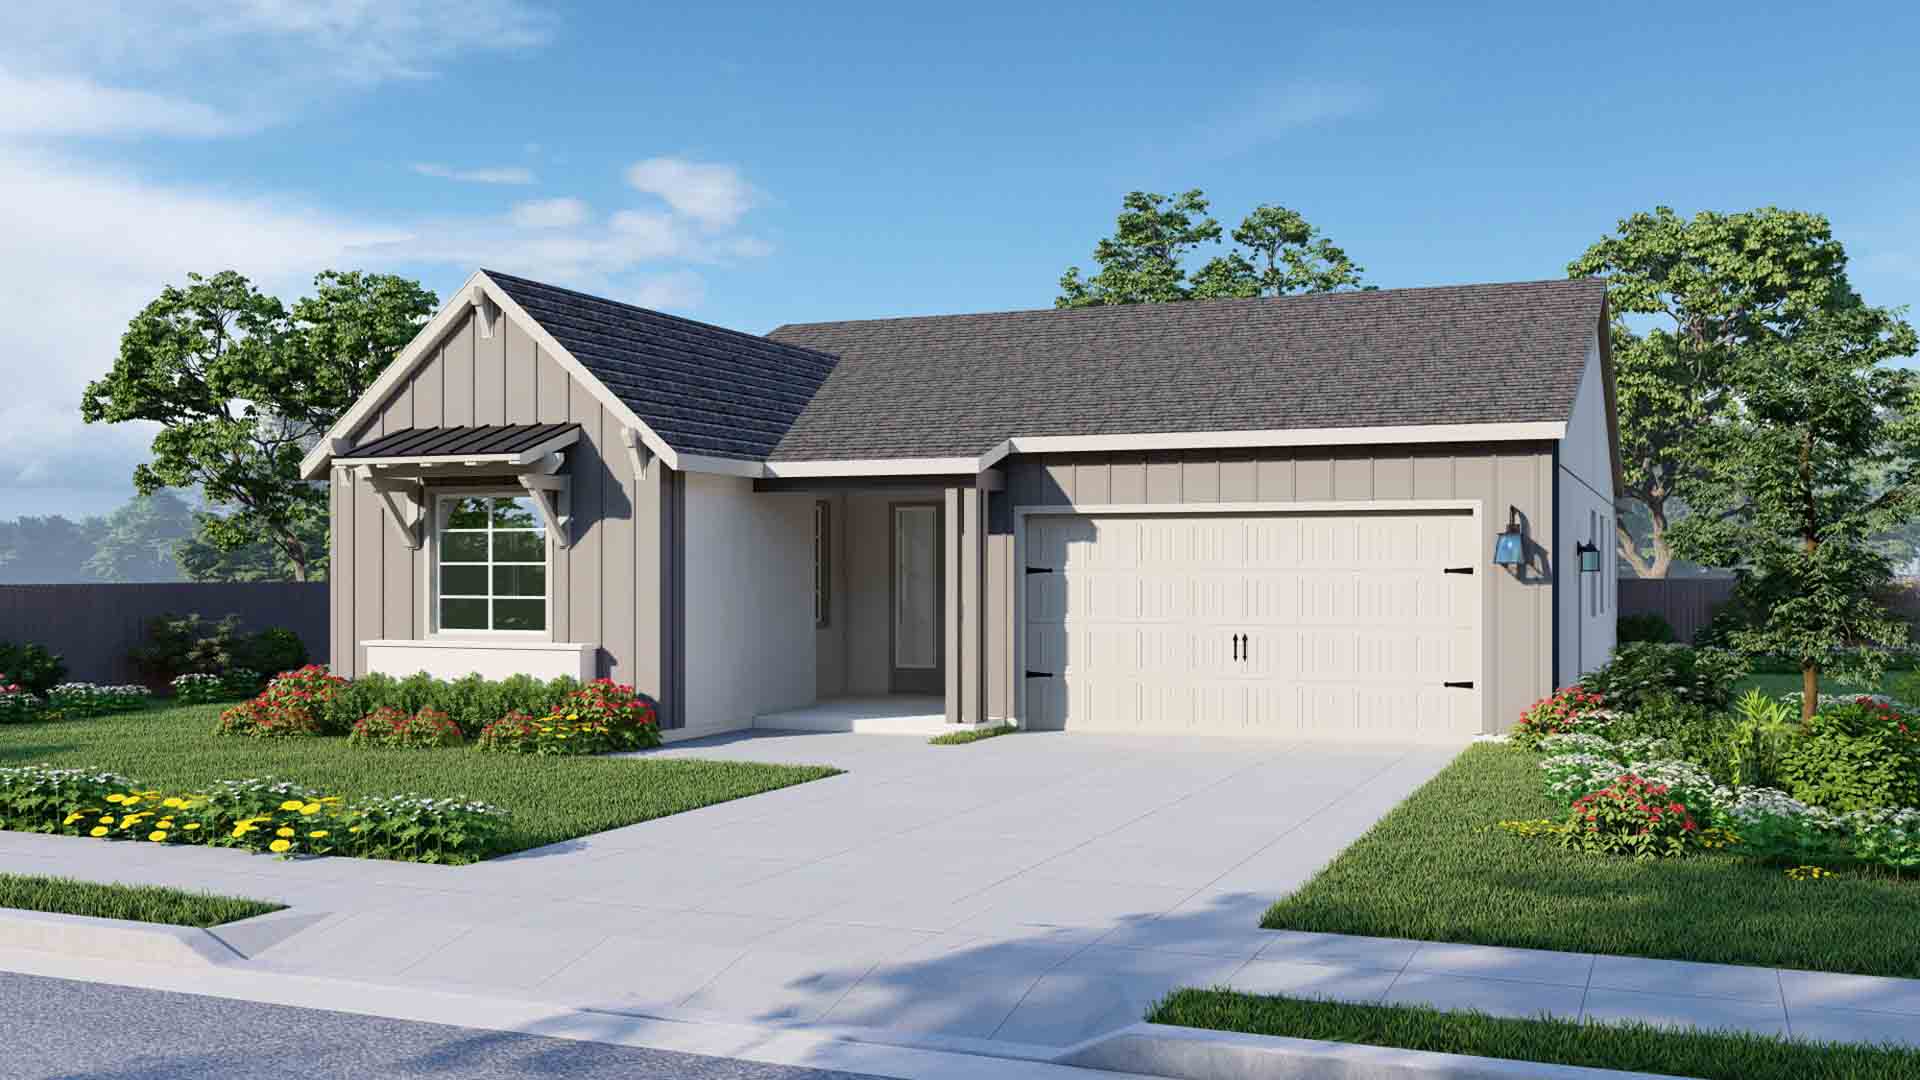 All Savannah elevations are one-story homes. The Modern Farmhouse elevation features trim and details that give it a welcoming farmhouse look. The model pictured has light gray vertical siding with white trim. The garage door is white and has paneling and metal accents that give it an elevated look.